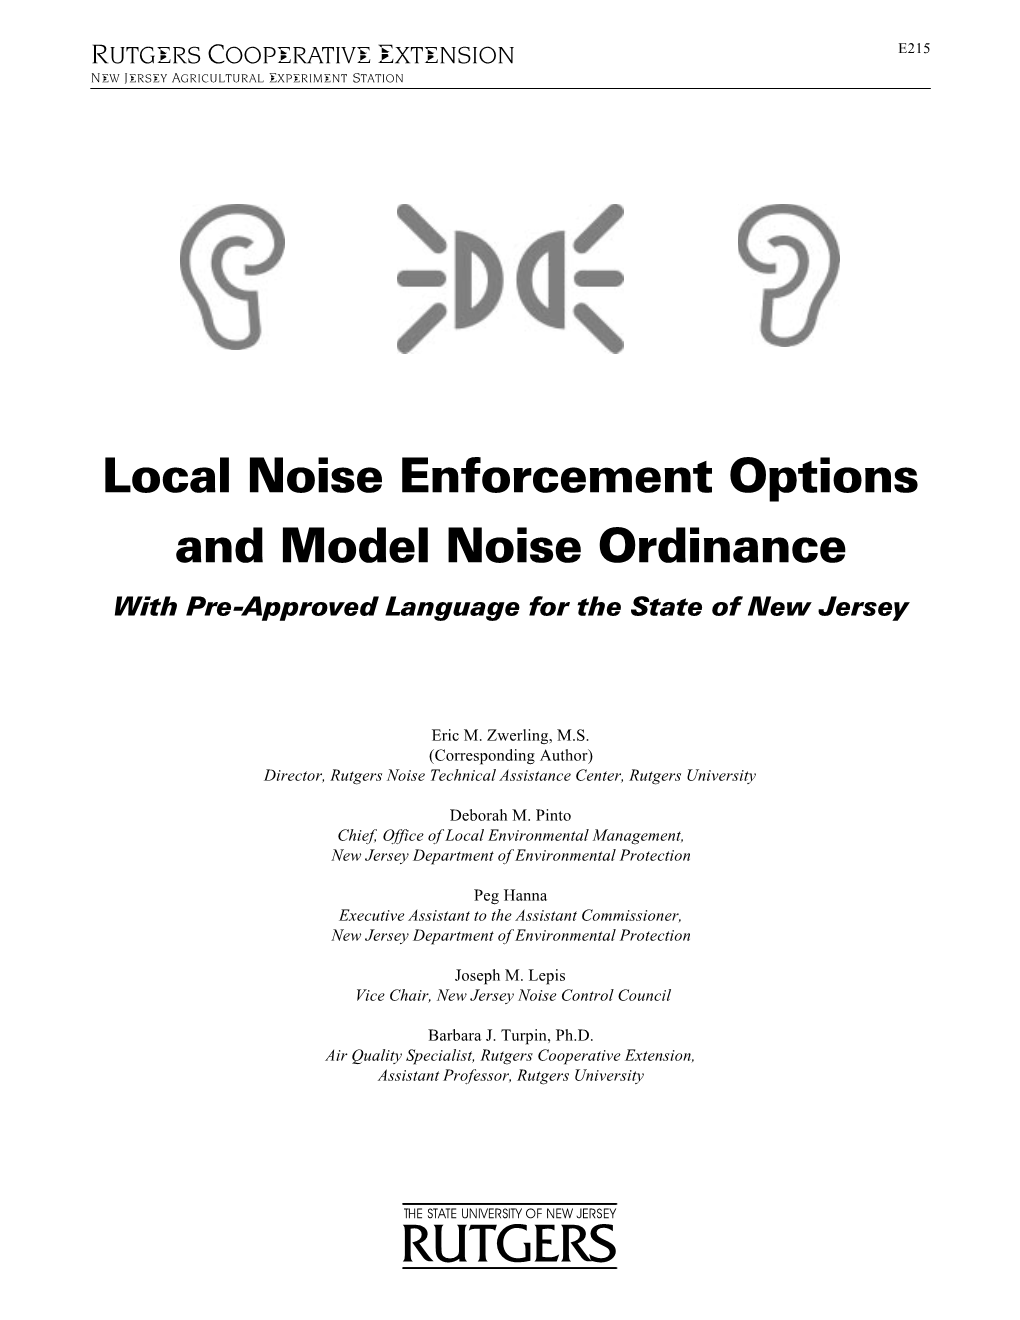 Local Noise Enforcement Options and Model Noise Ordinance with Pre-Approved Language for the State of New Jersey